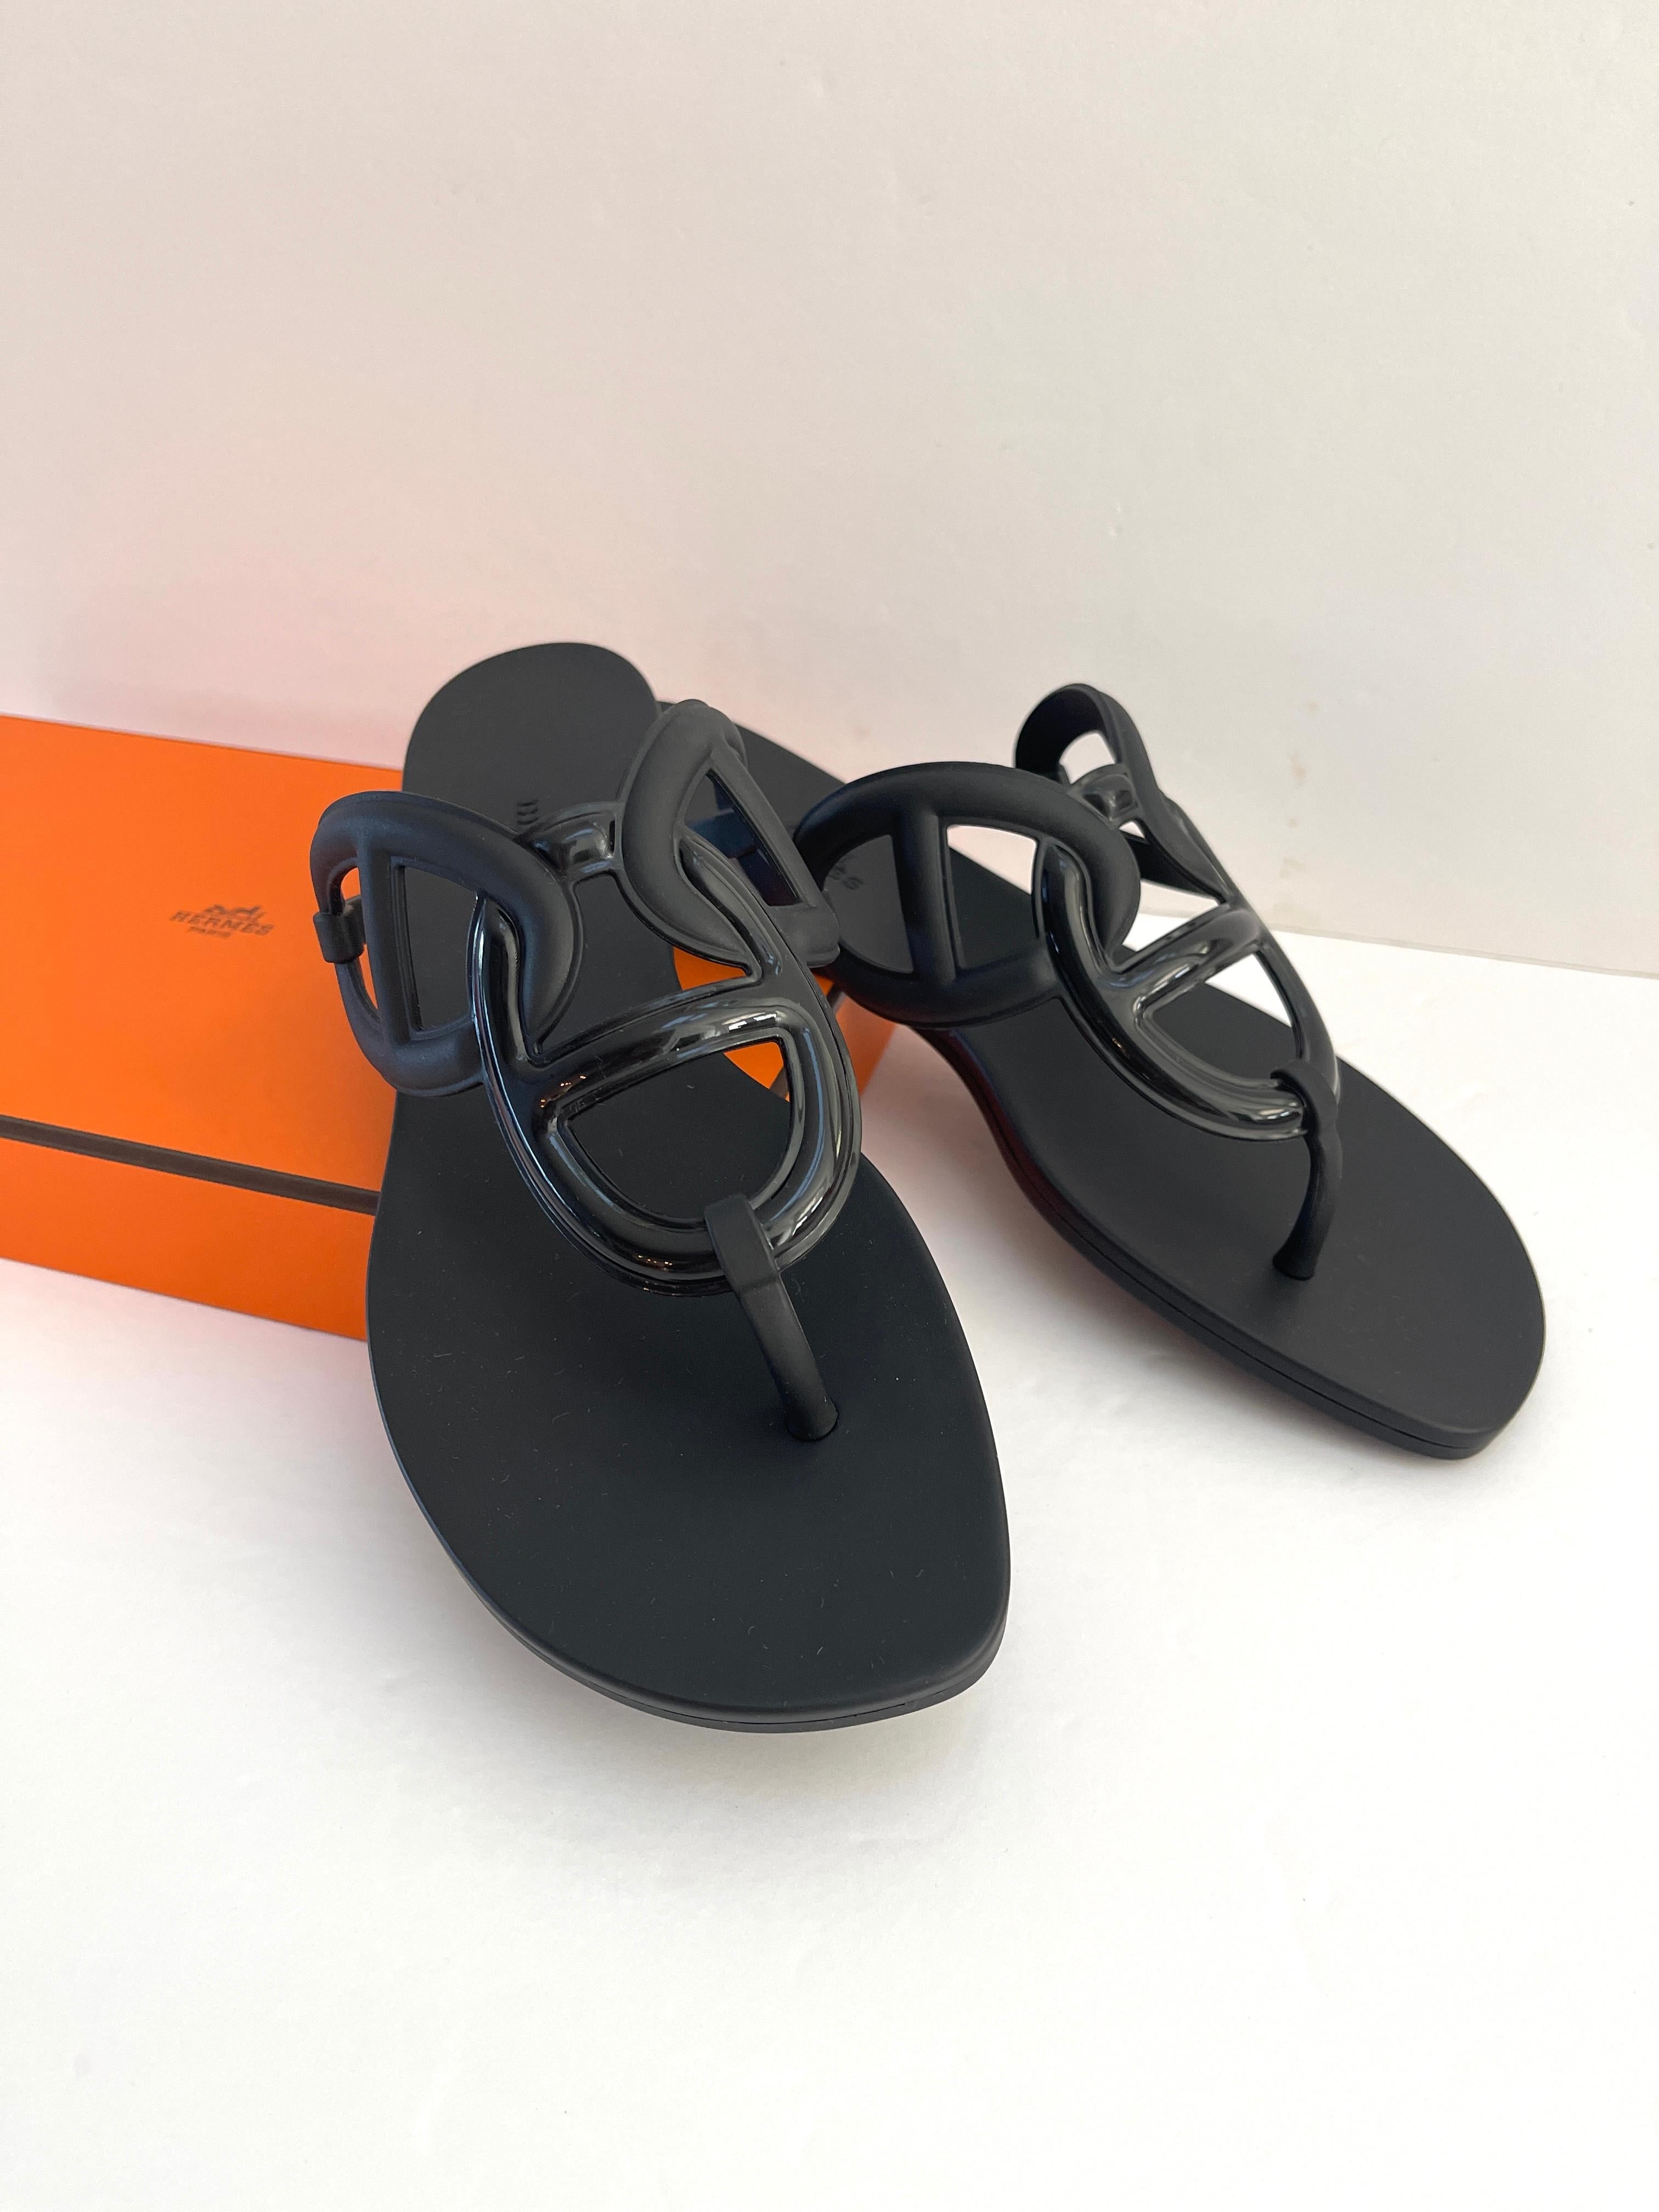 Egerie Sandals
Jelly Rubber
Black
Size 38
New in Hermes Box with Dustcovers
New never used